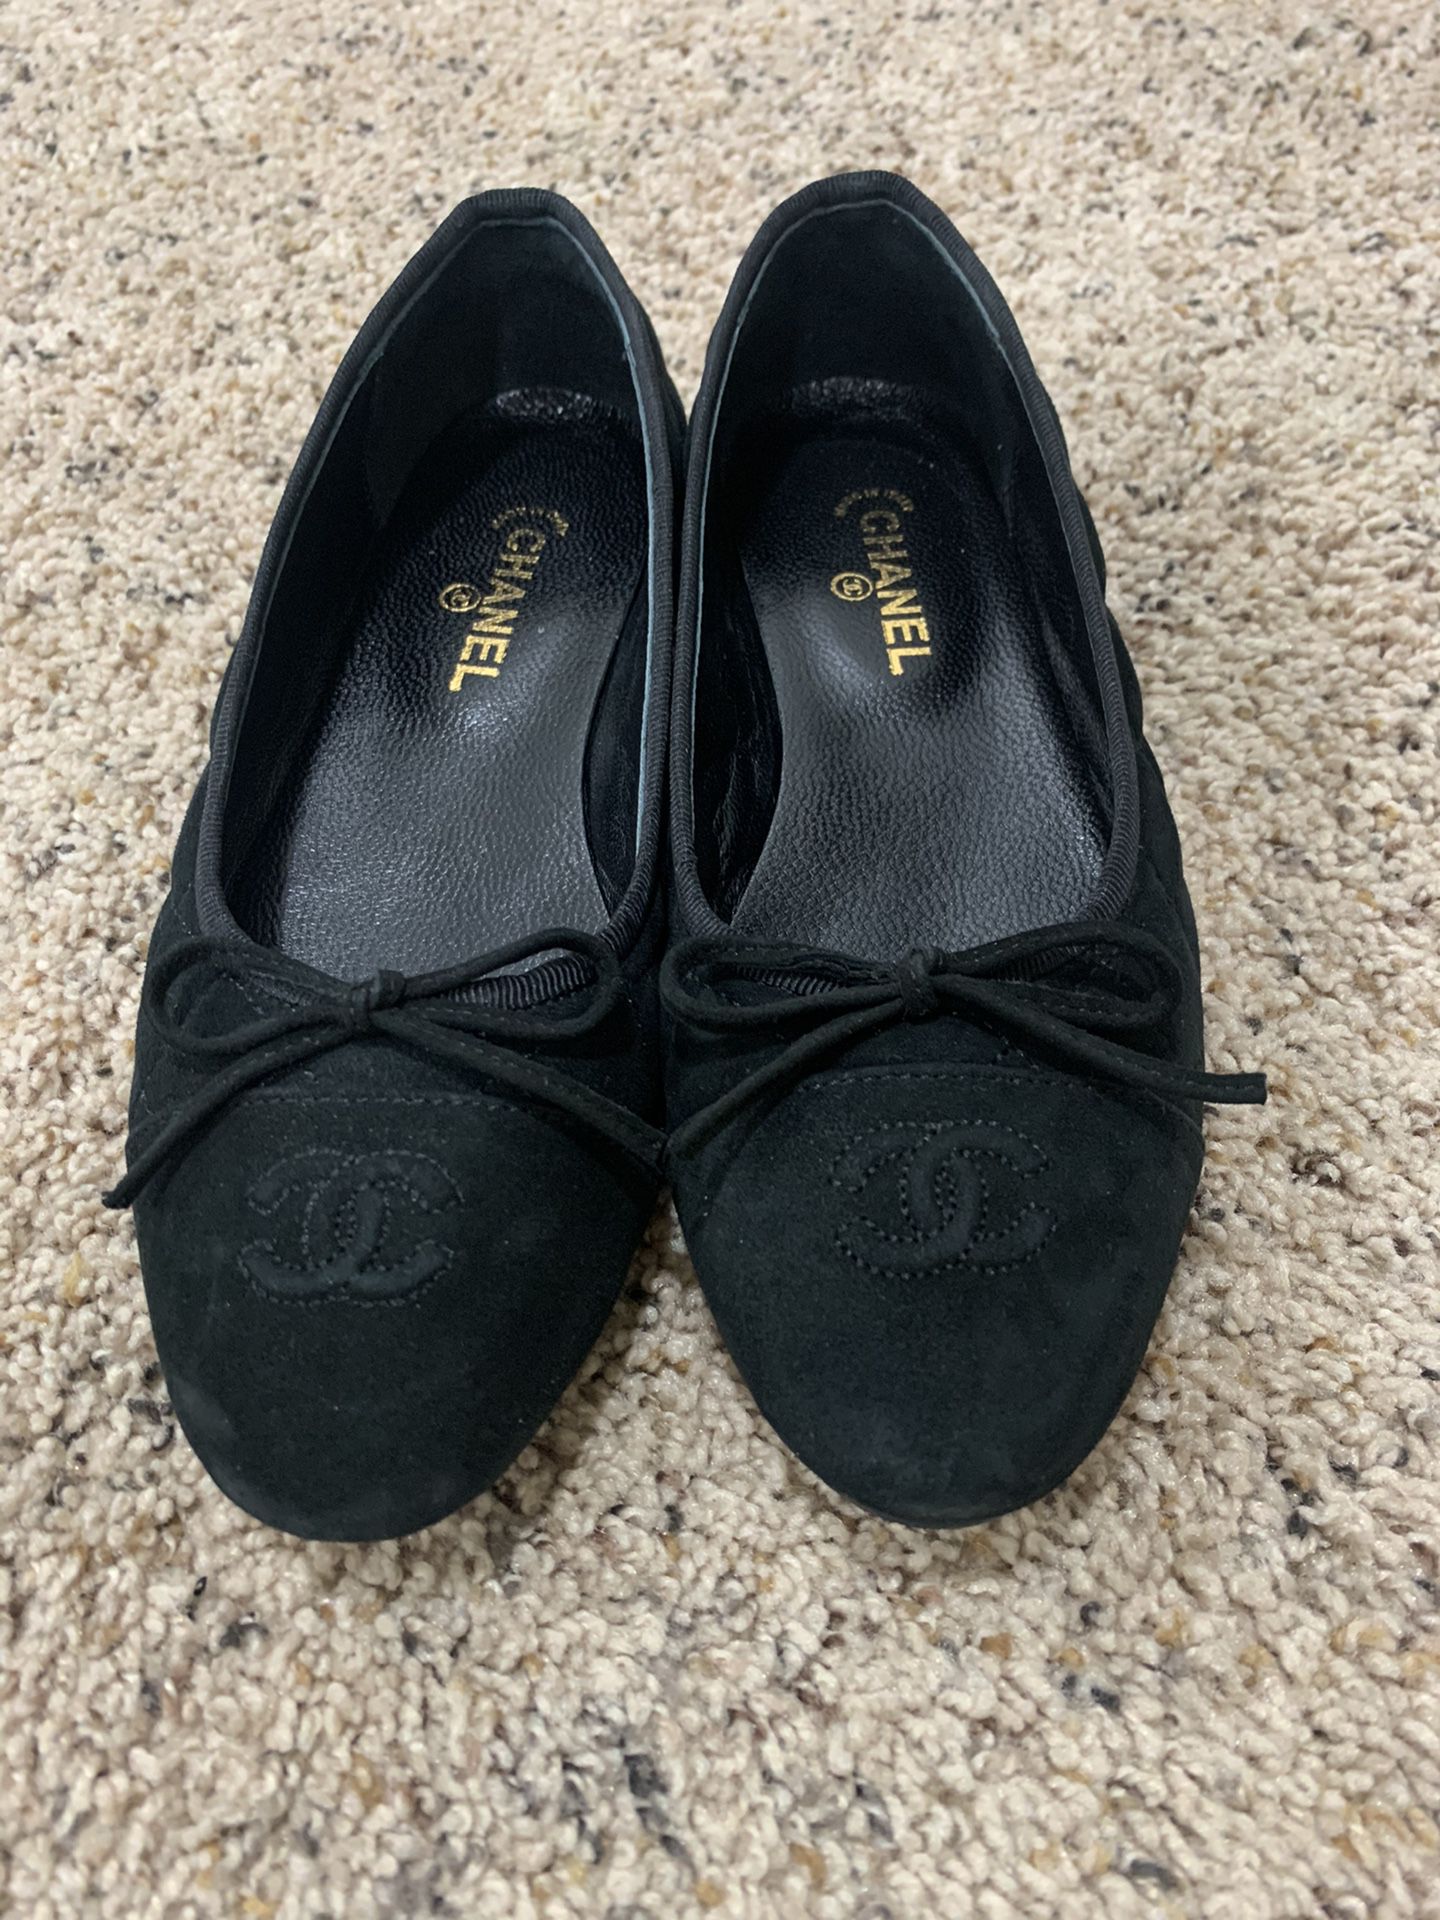 Chanel master copy shoes for Sale in Houston, TX - OfferUp